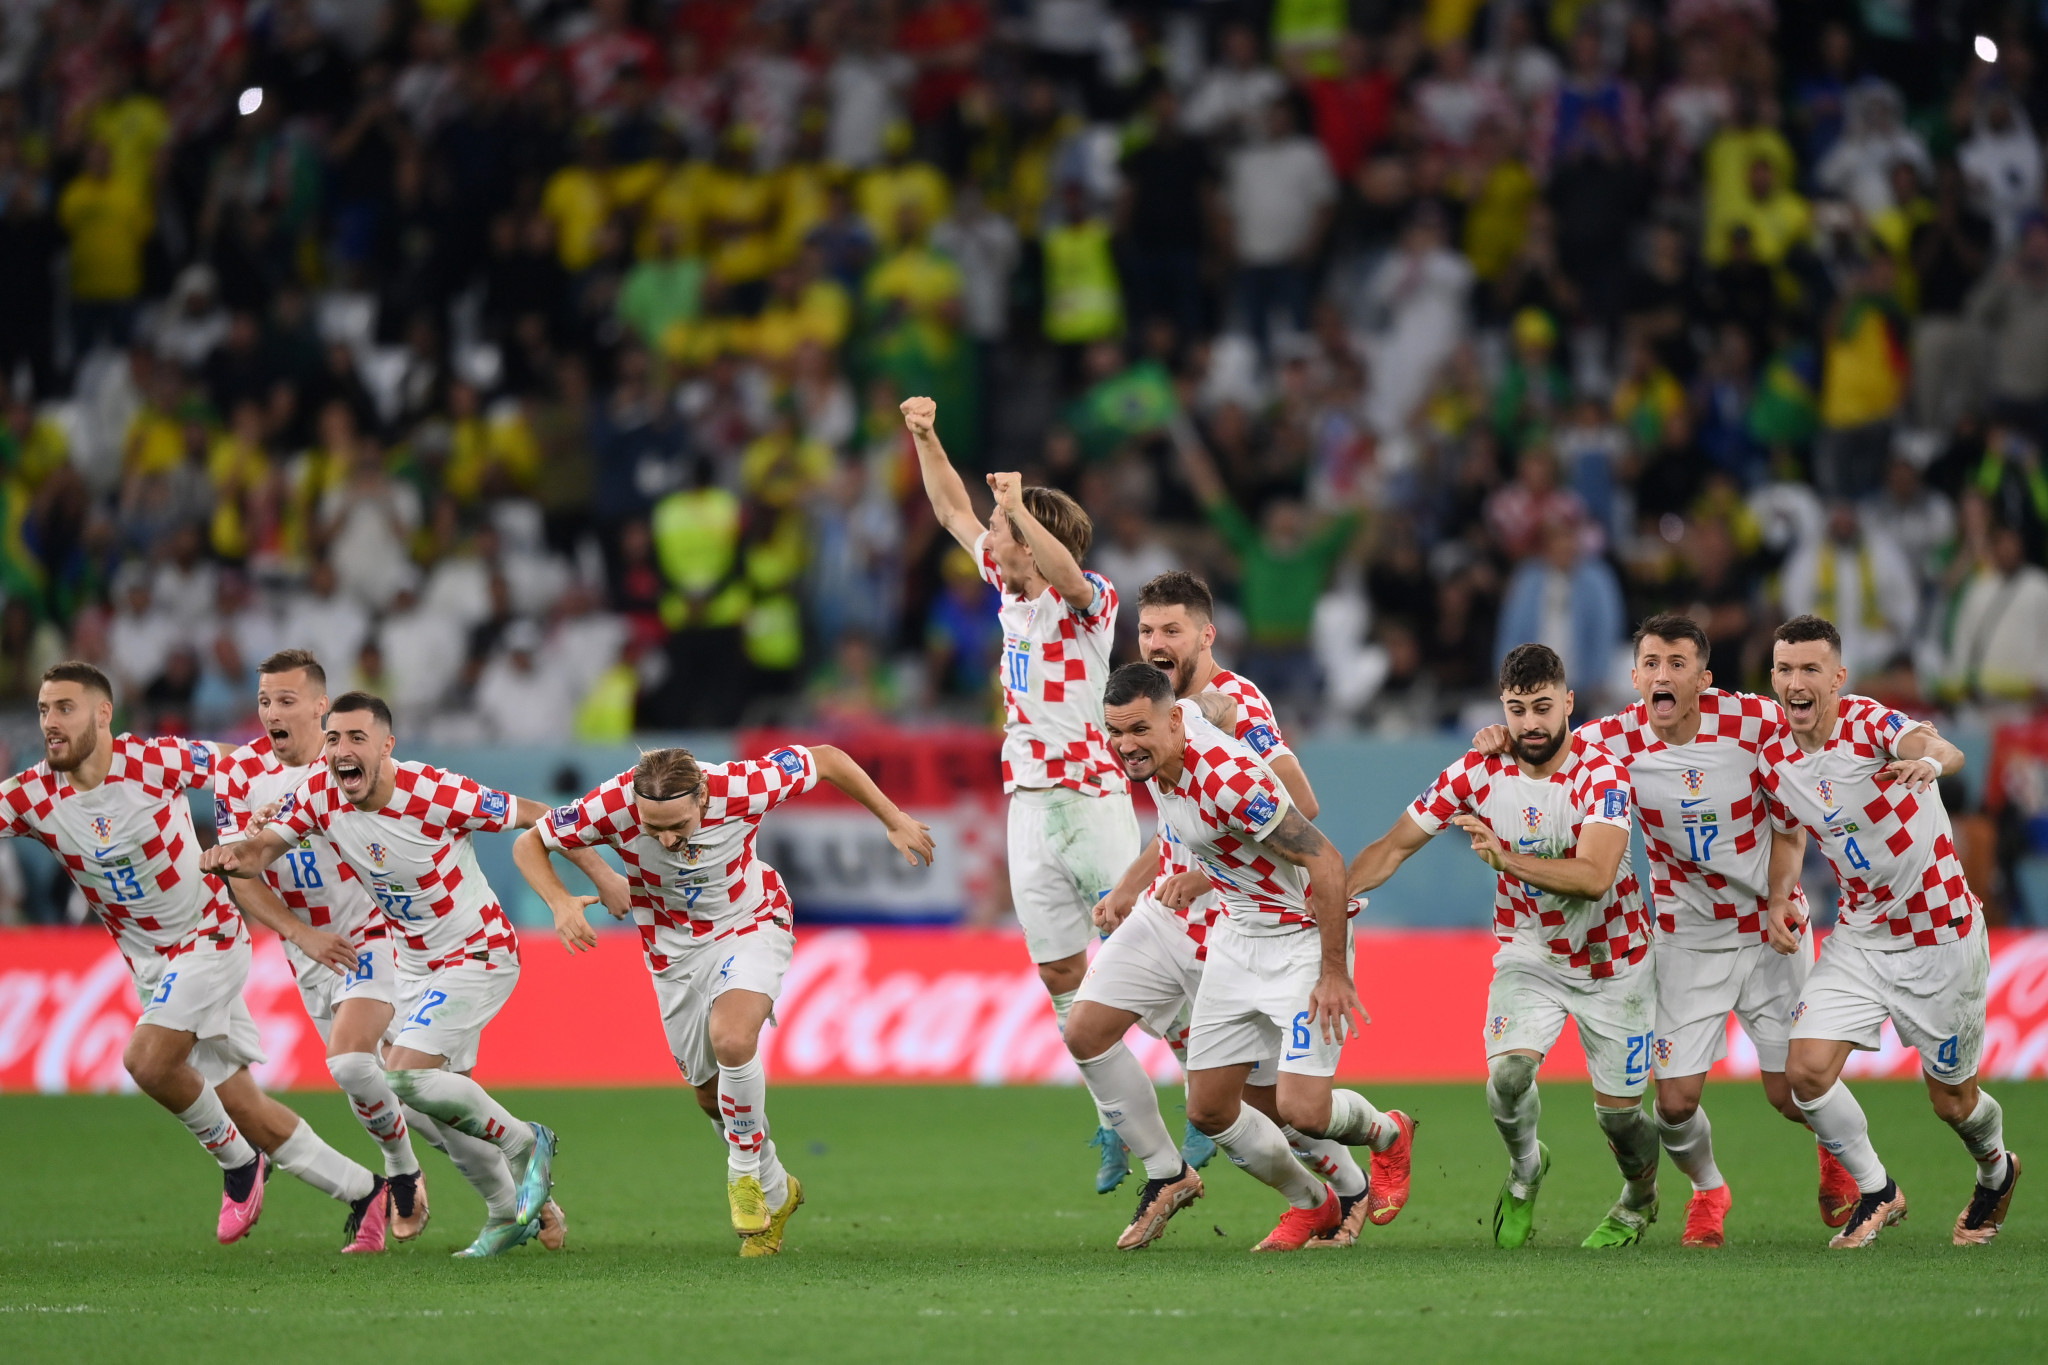 Croatia's players celebrate after beating Brazil on penalties to reach the World Cup semi-finals ©Getty Images